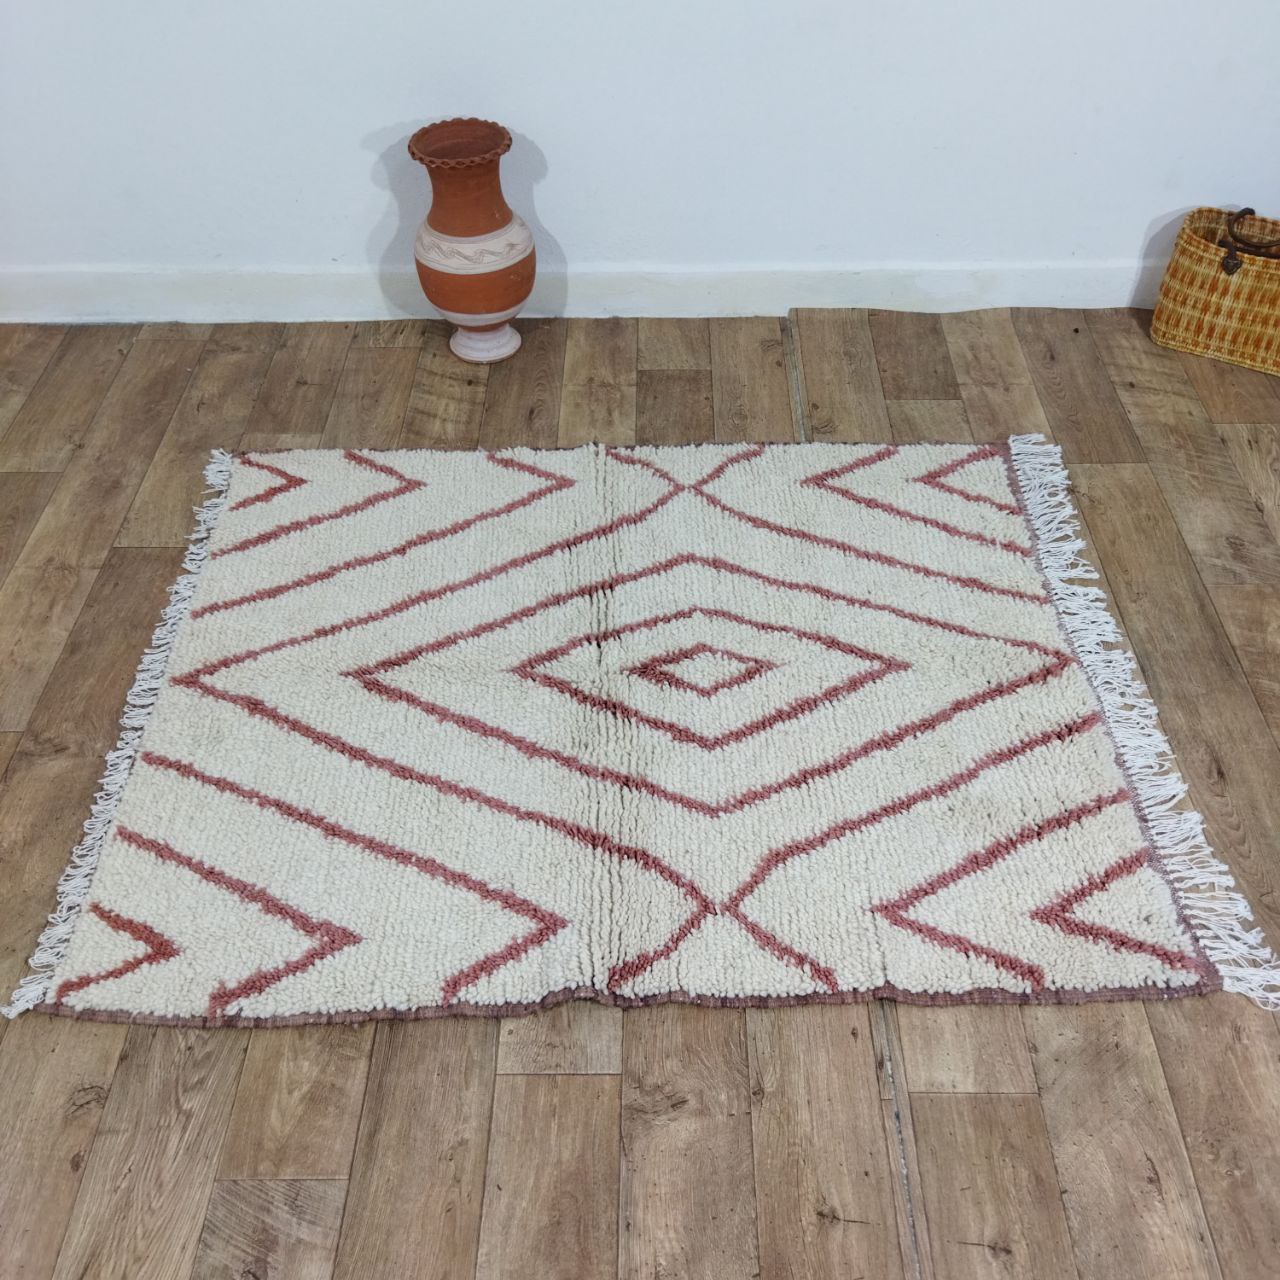 Authentic White And Red Moroccan Small Rug - 4x5 Ft Wool Berber Carpet